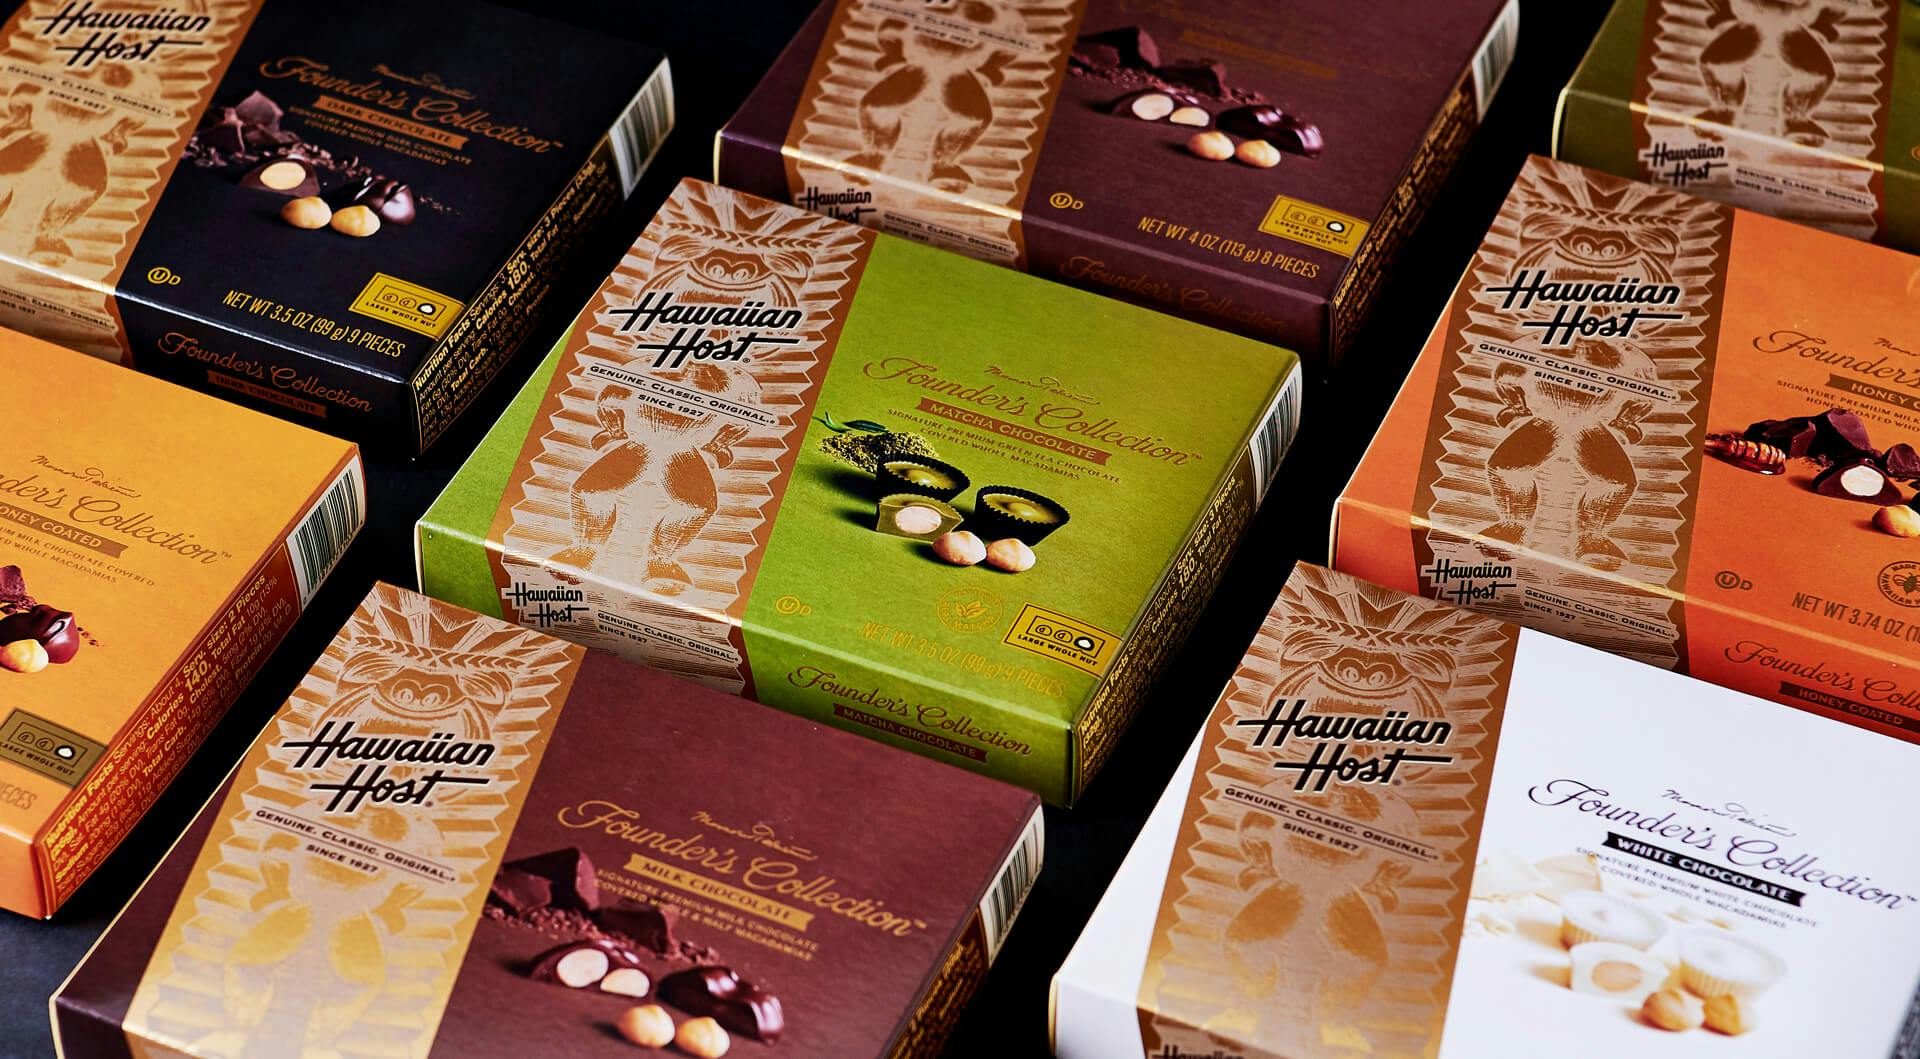 The Founders Collection Package design carried on several boxes of different flavored chocolate covered macadamia nuts. Flavors range from white chocolate, matcha, honey-coated, dark chocolate, mik chocolate, and more. 